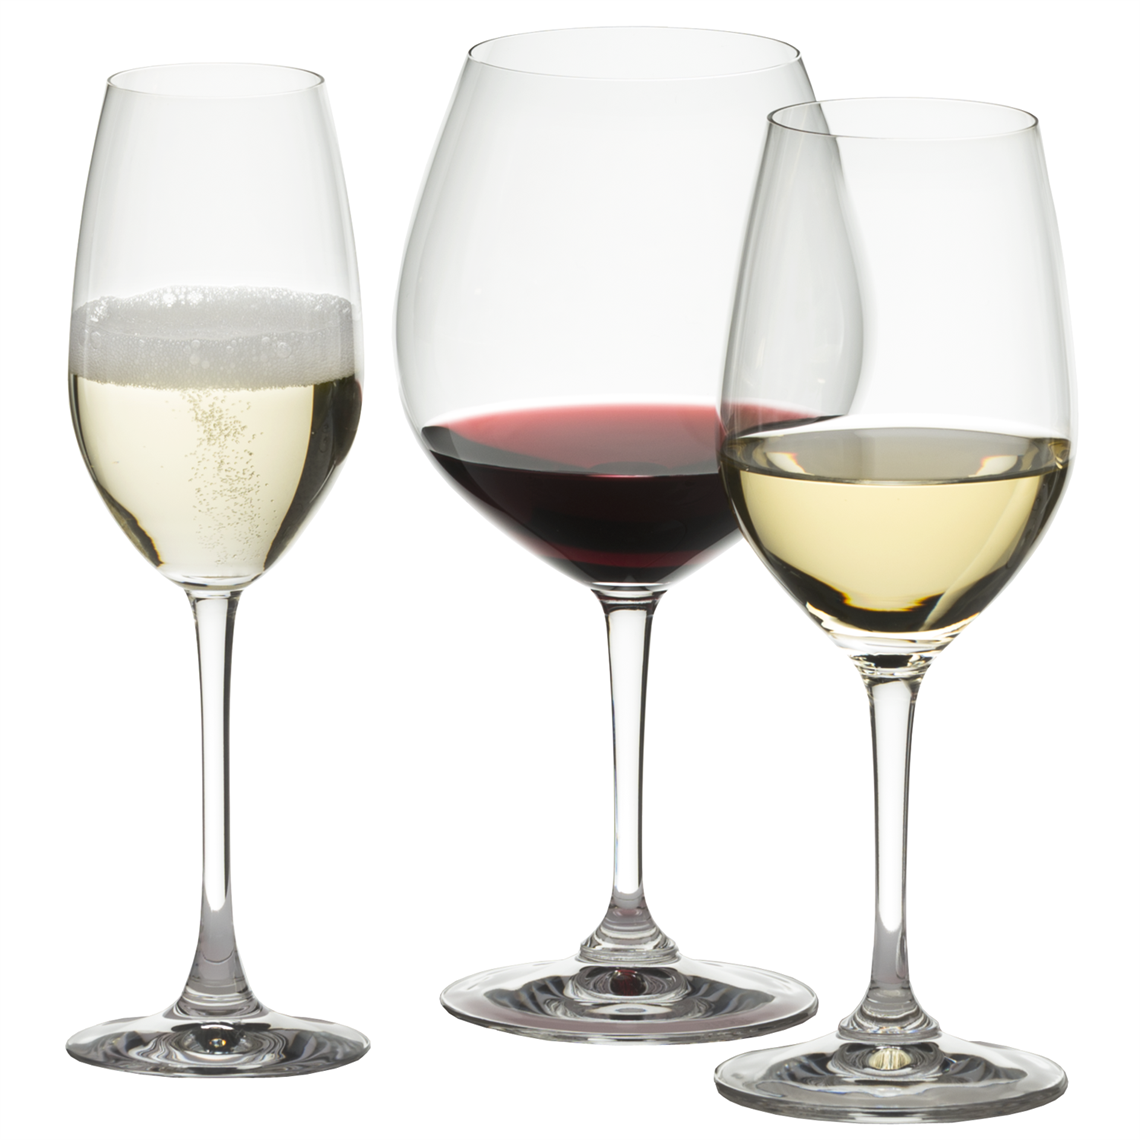 View more exquisit from our Restaurant & Trade Glasses range